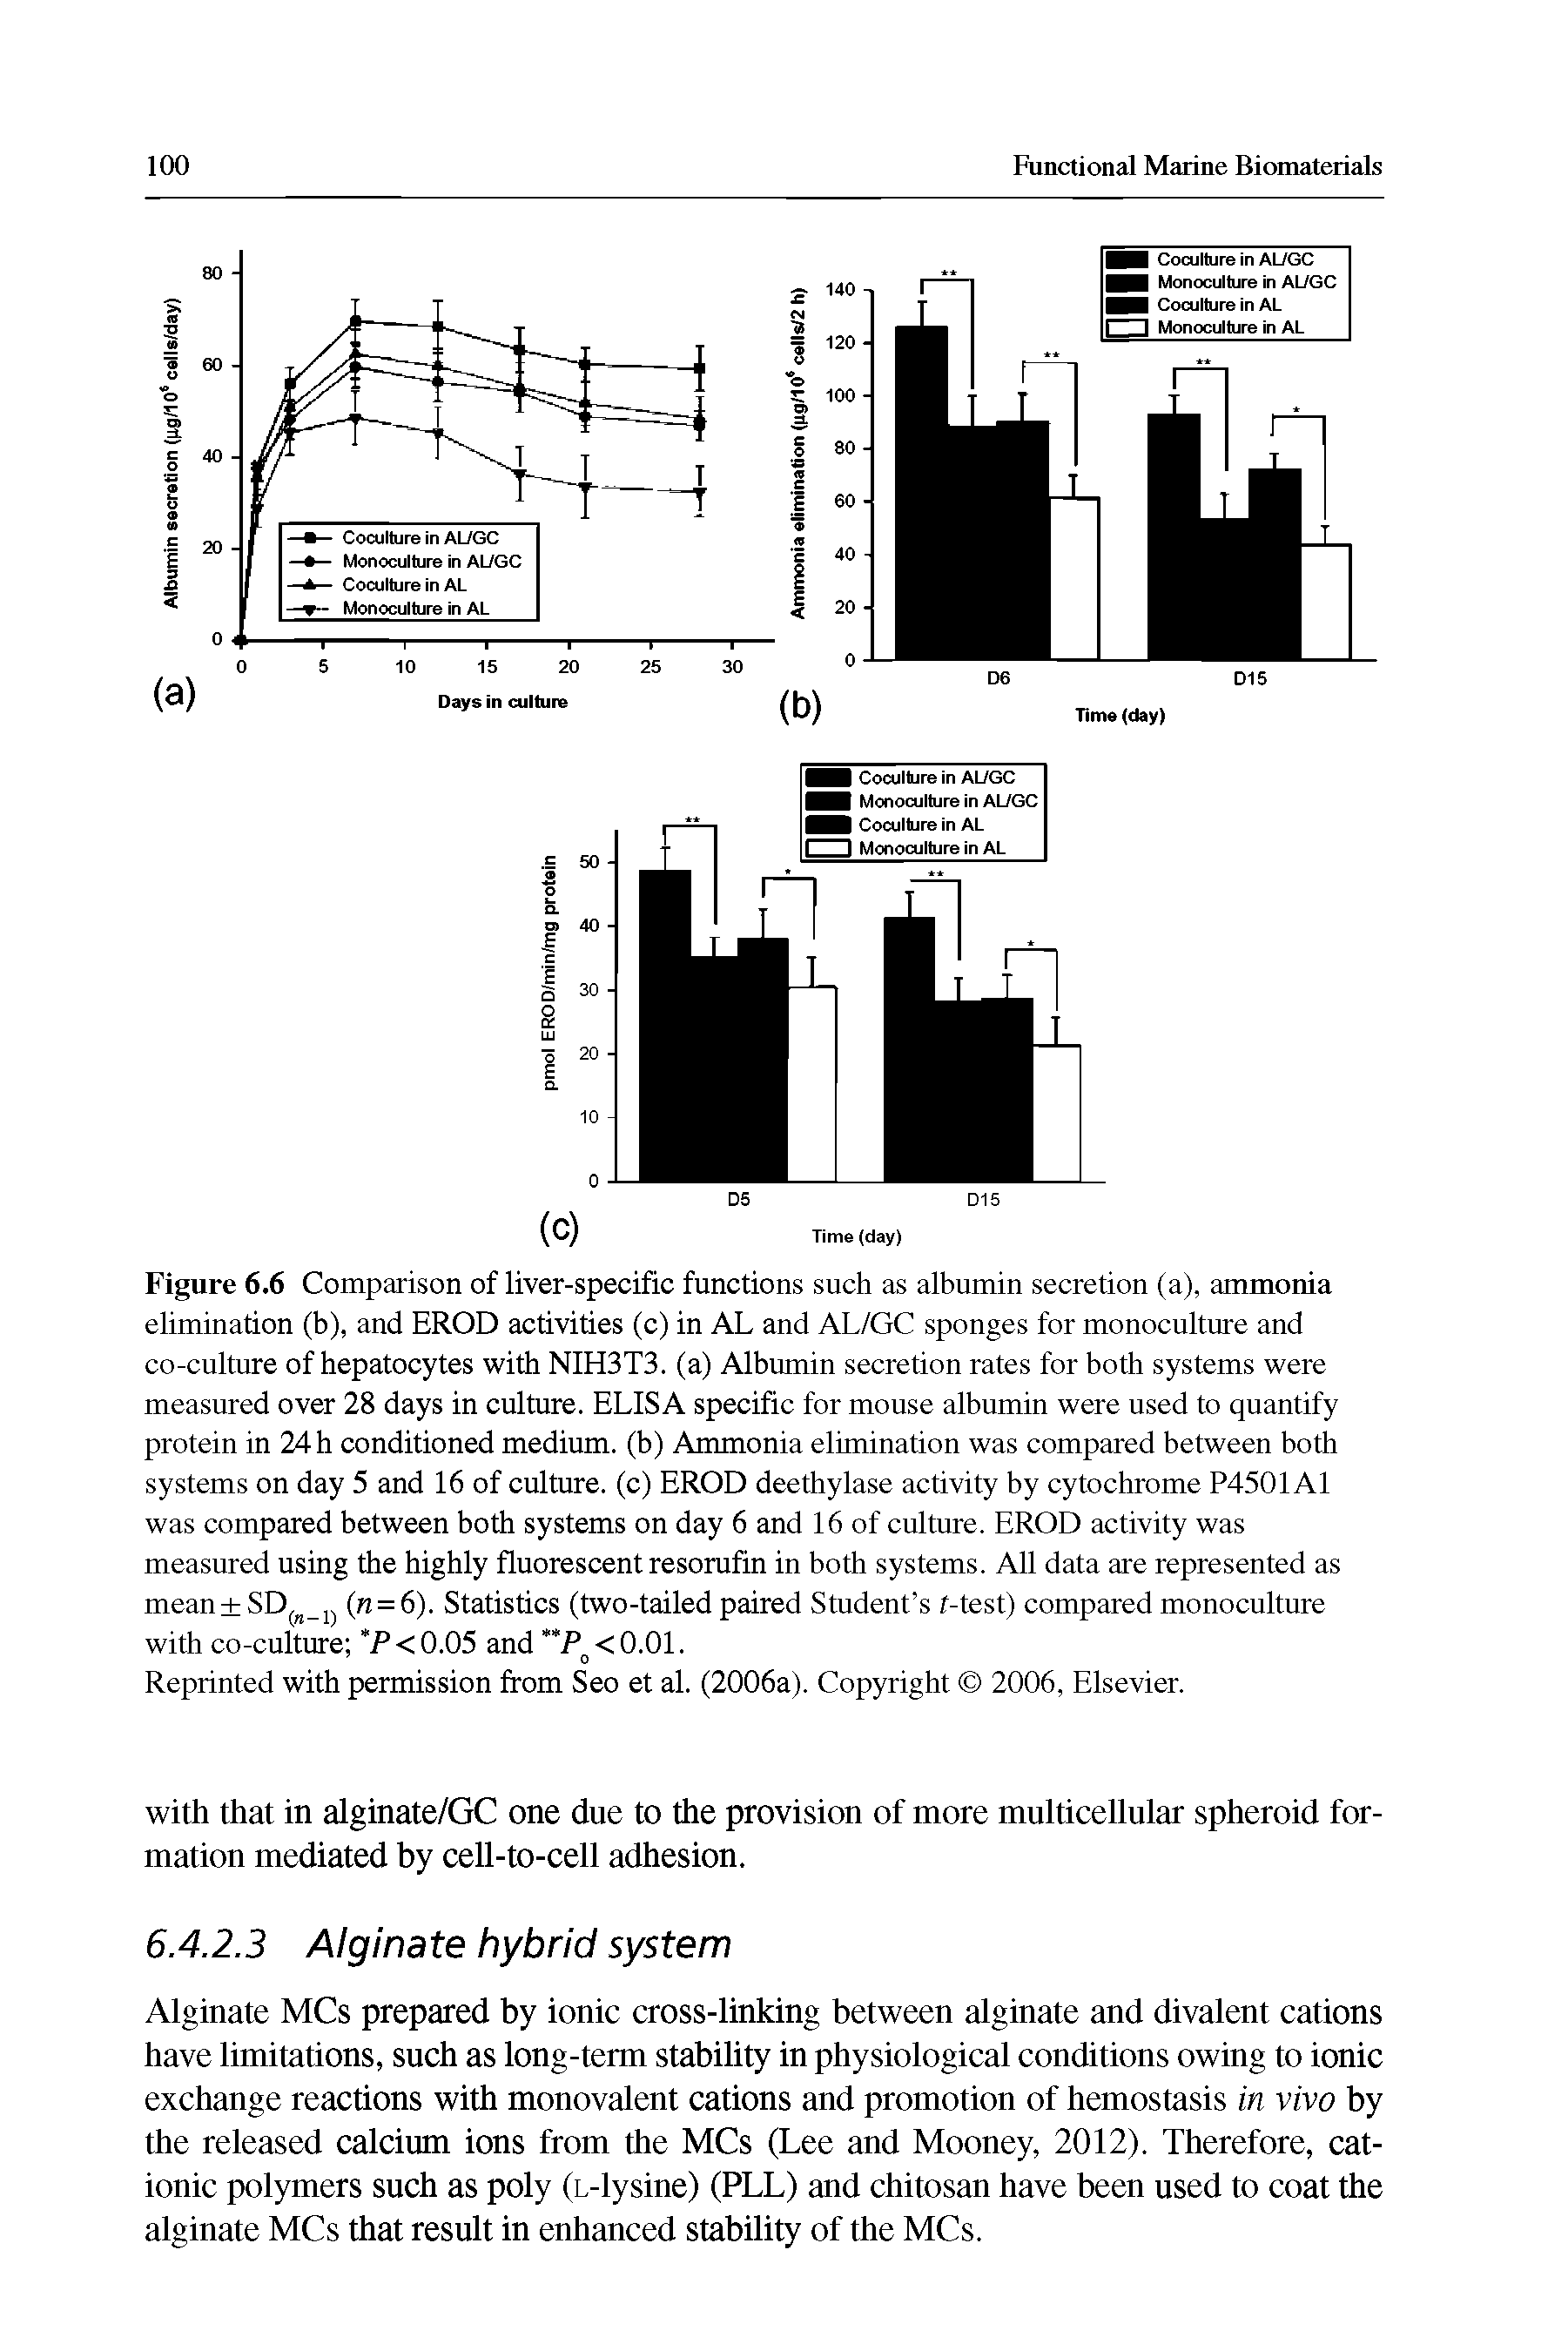 Figure 6.6 Comparison of liver-specific functions such as albumin secretion (a), ammonia elimination (b), and EROD activities (c) in AL and AL/GC sponges for monoculture and co-culture of hepatocytes with NIH3T3. (a) Albumin secretion rates for both systems were measured over 28 days in culture. ELISA specific for mouse albumin were used to quantify protein in 24h conditioned medium, (b) Ammonia elimination was compared between both systems on day 5 and 16 of culture, (c) EROD deethylase activity by cytochrome P4501A1 was compared between both systems on day 6 and 16 of culture. EROD activity was measured using the highly fluorescent resomfin in both systems. All data are represented as mean SDj jj (n = 6). Statistics (two-tailed paired Smdent s f-test) compared monoculture with co-culture P<0.05 and "P <0.01.